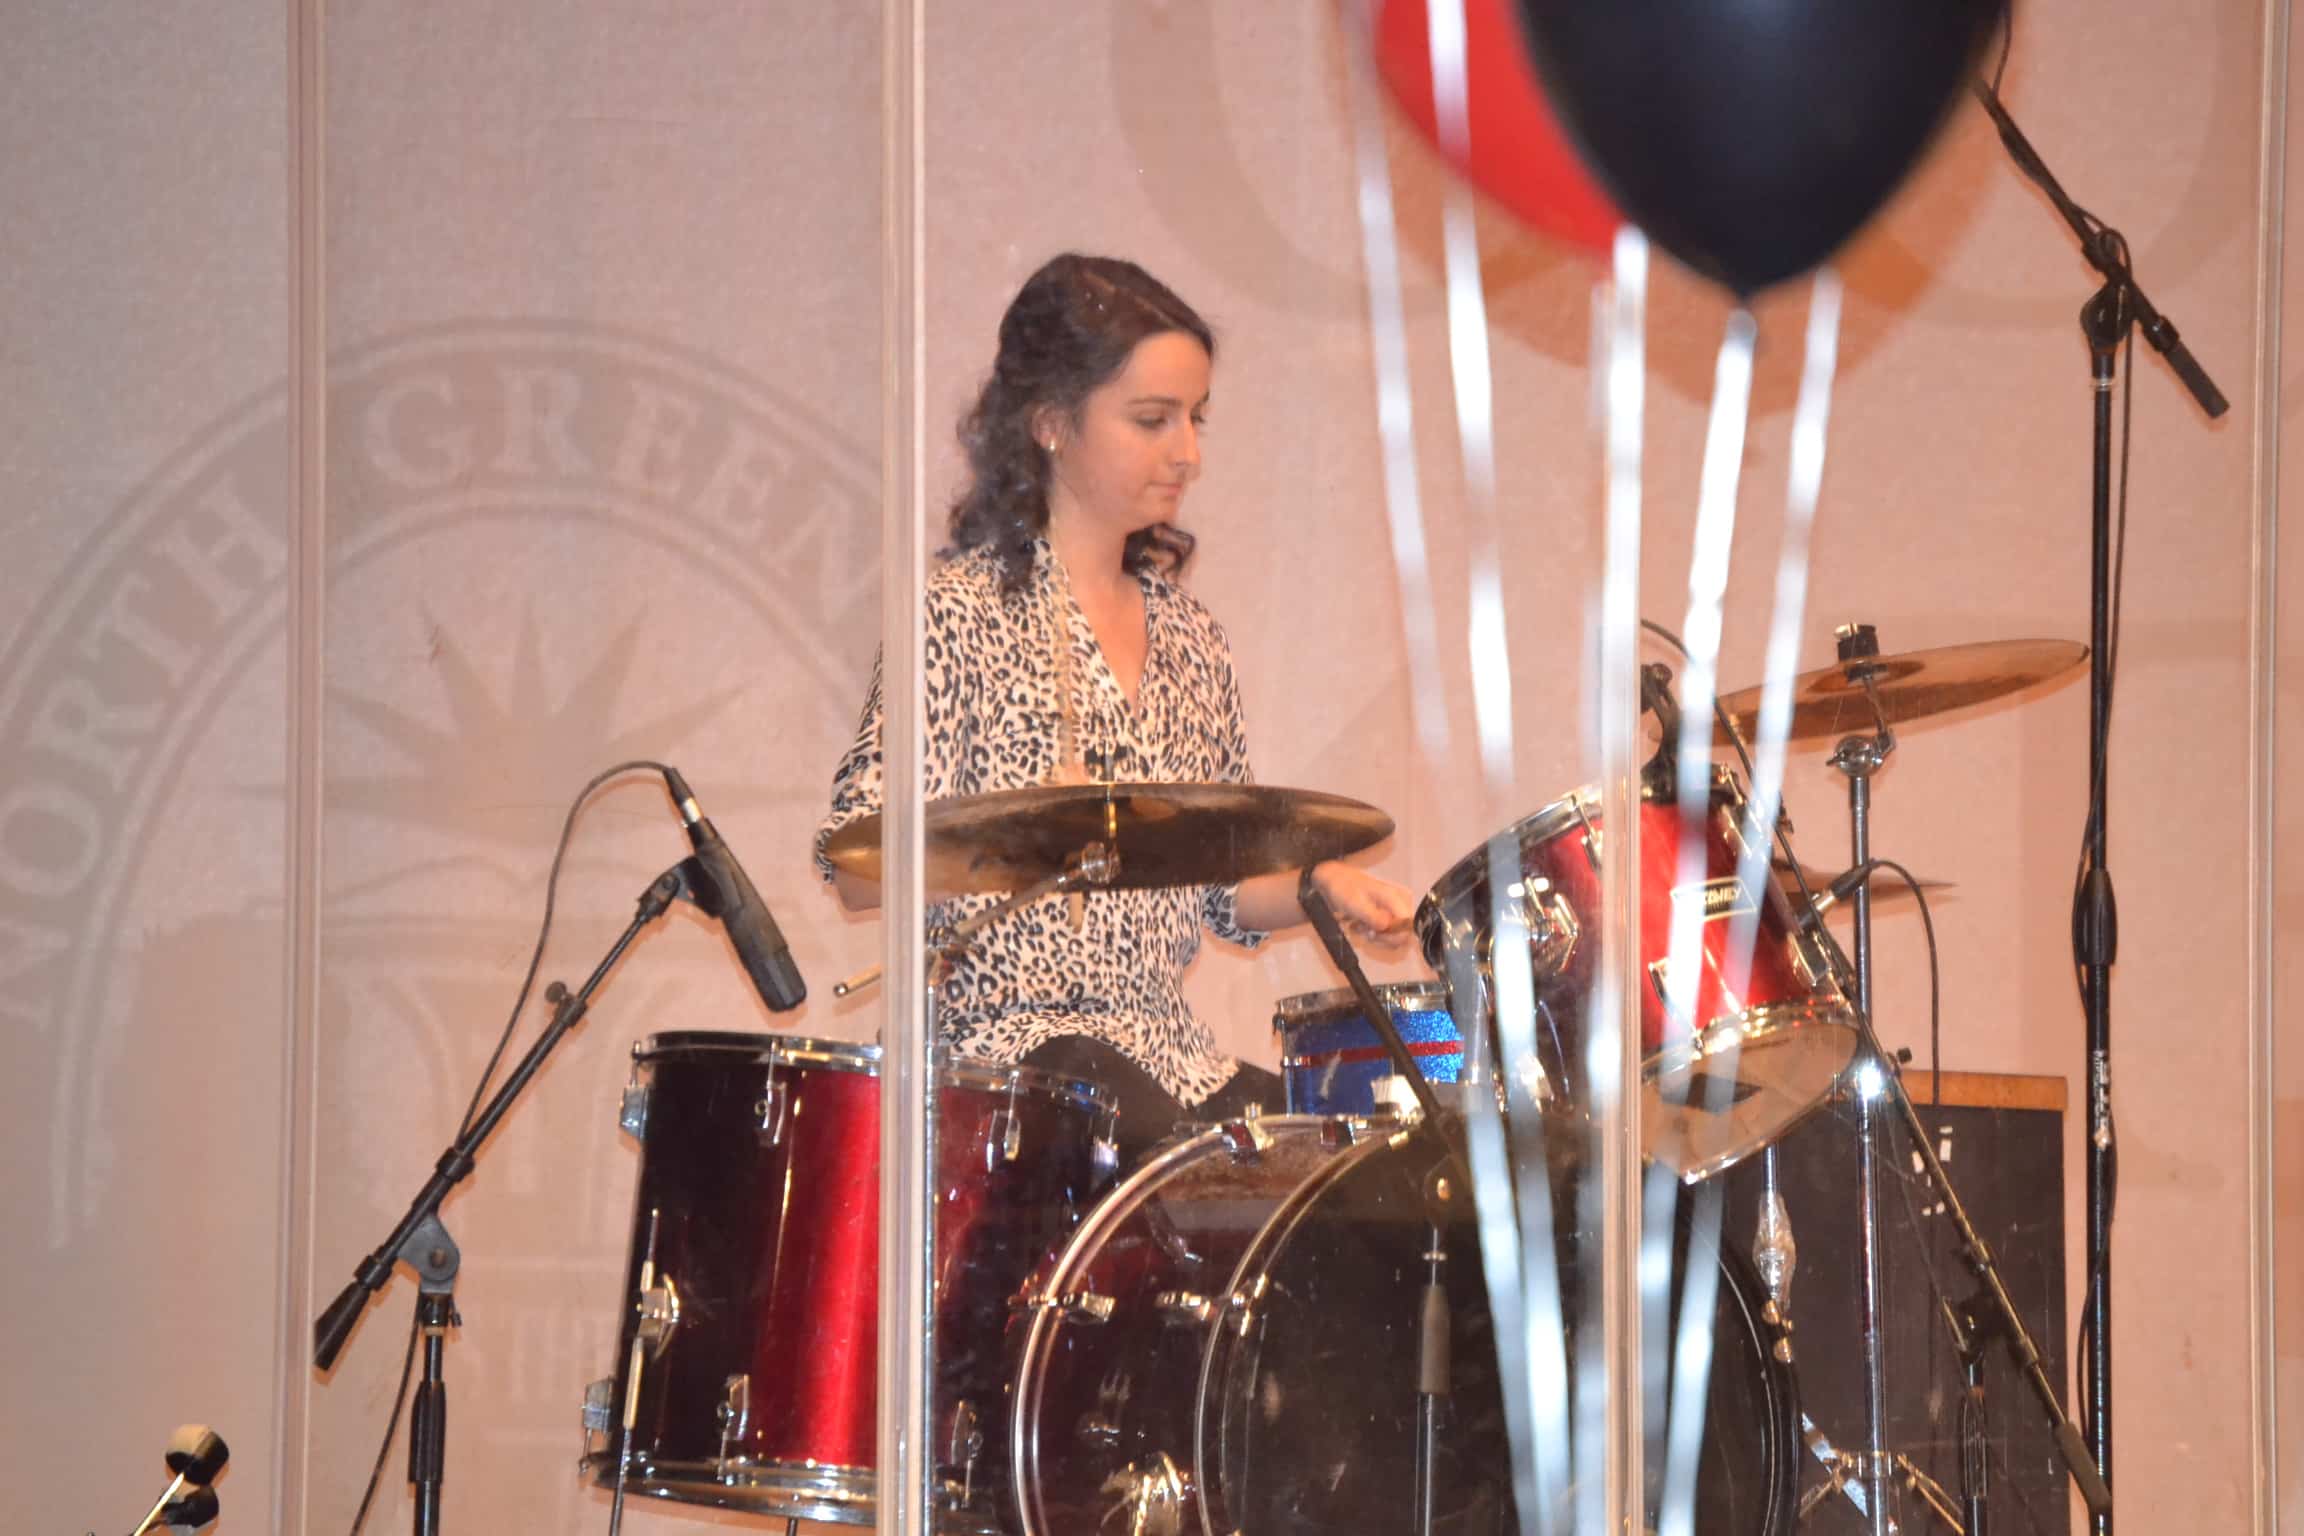  Valorie Bostik shows the audience her awesome talent of playing the drums.&nbsp; 